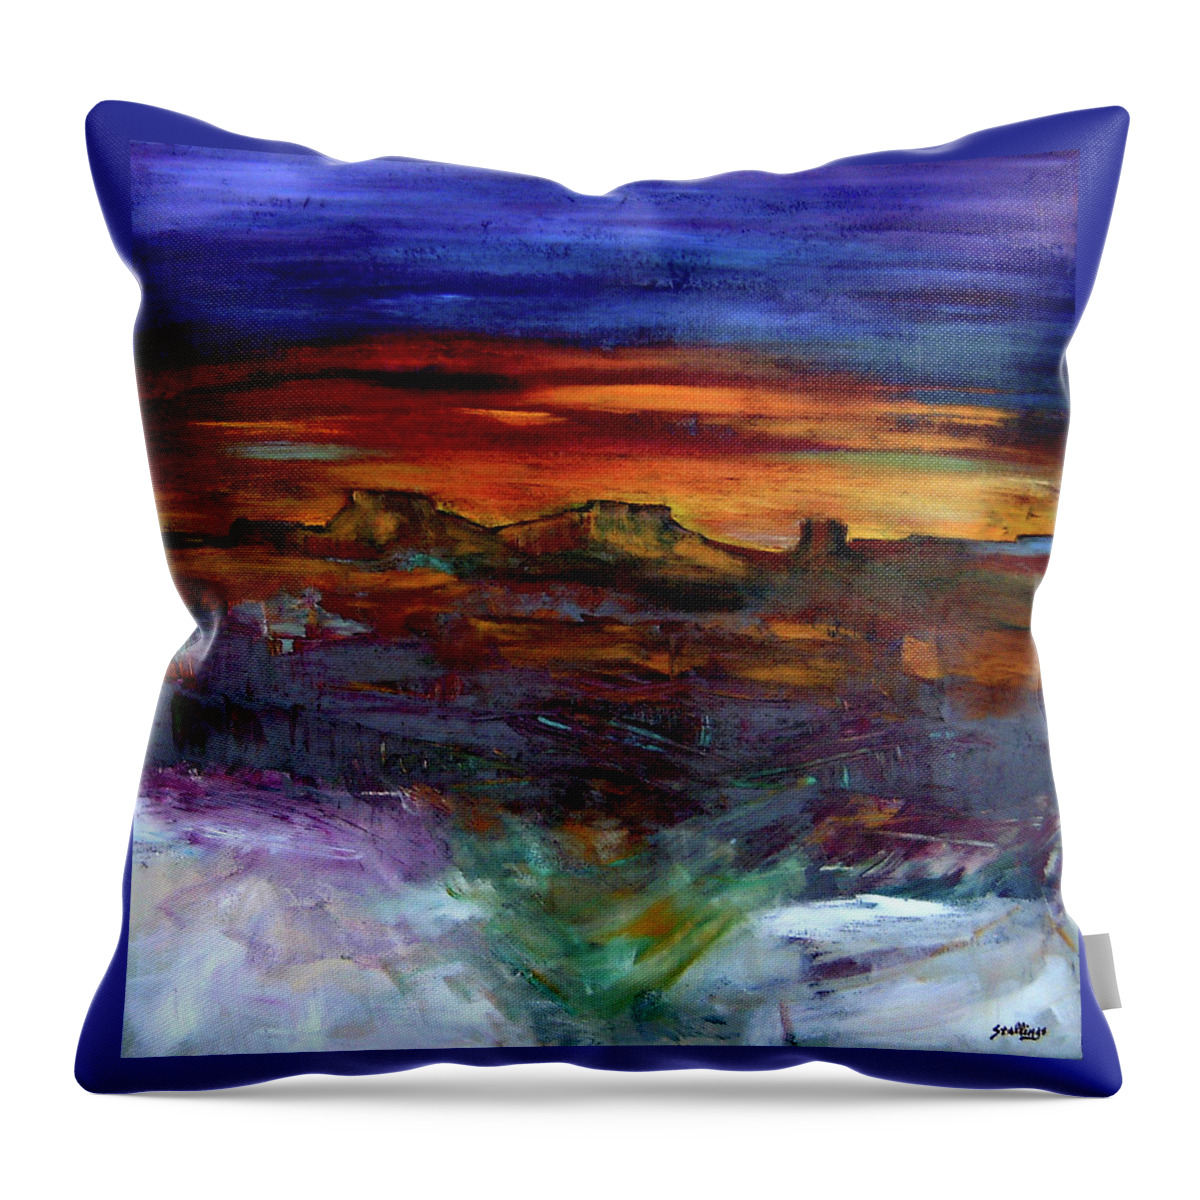 Landscape Throw Pillow featuring the painting Pruple Sky by Jim Stallings